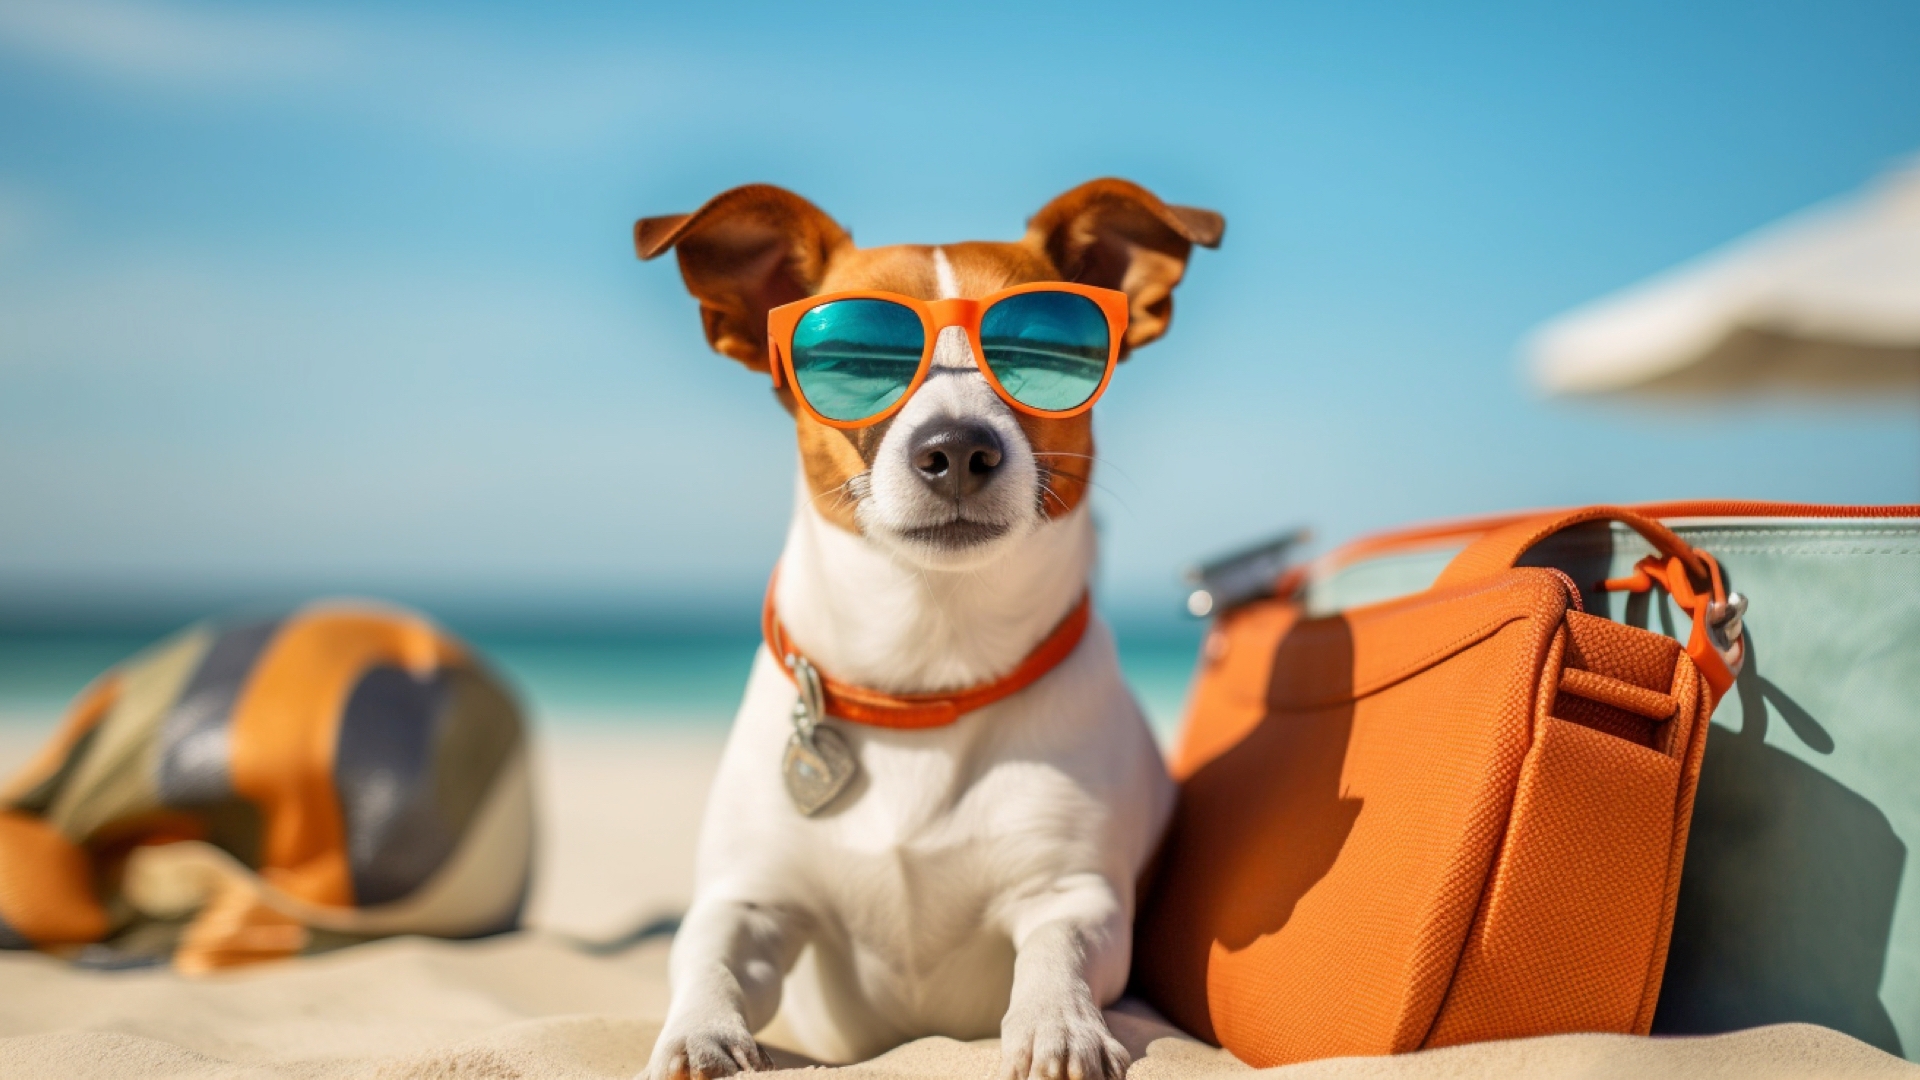 Doggy Beach Hacks: How to Have the Best Summer Fun with Your Furry Friend